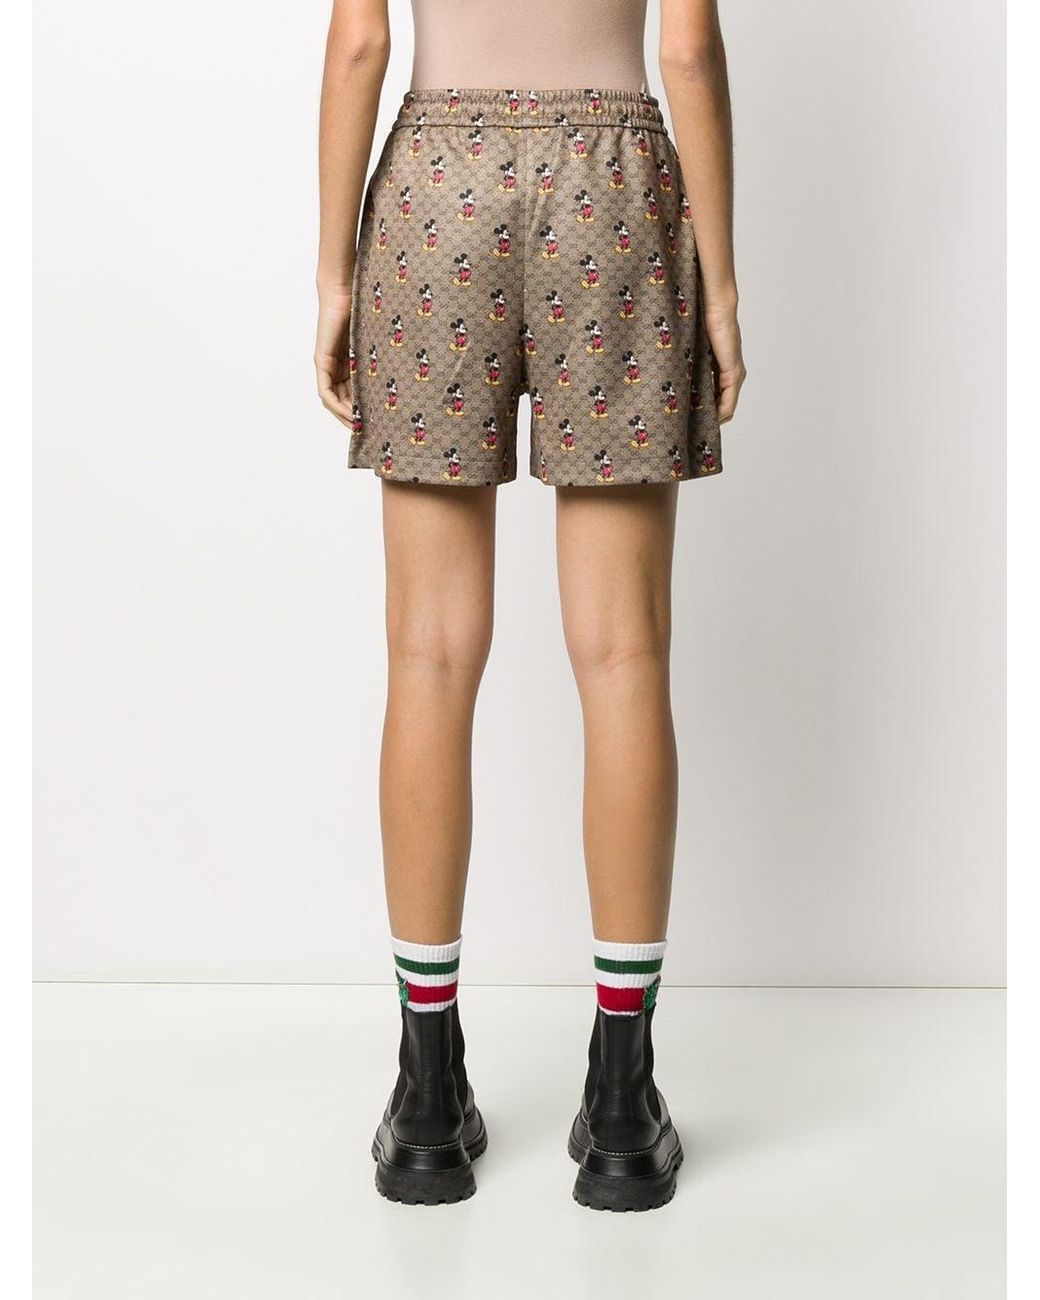 Gucci X Disney Mickey Mouse Print Shorts in Brown | Lyst